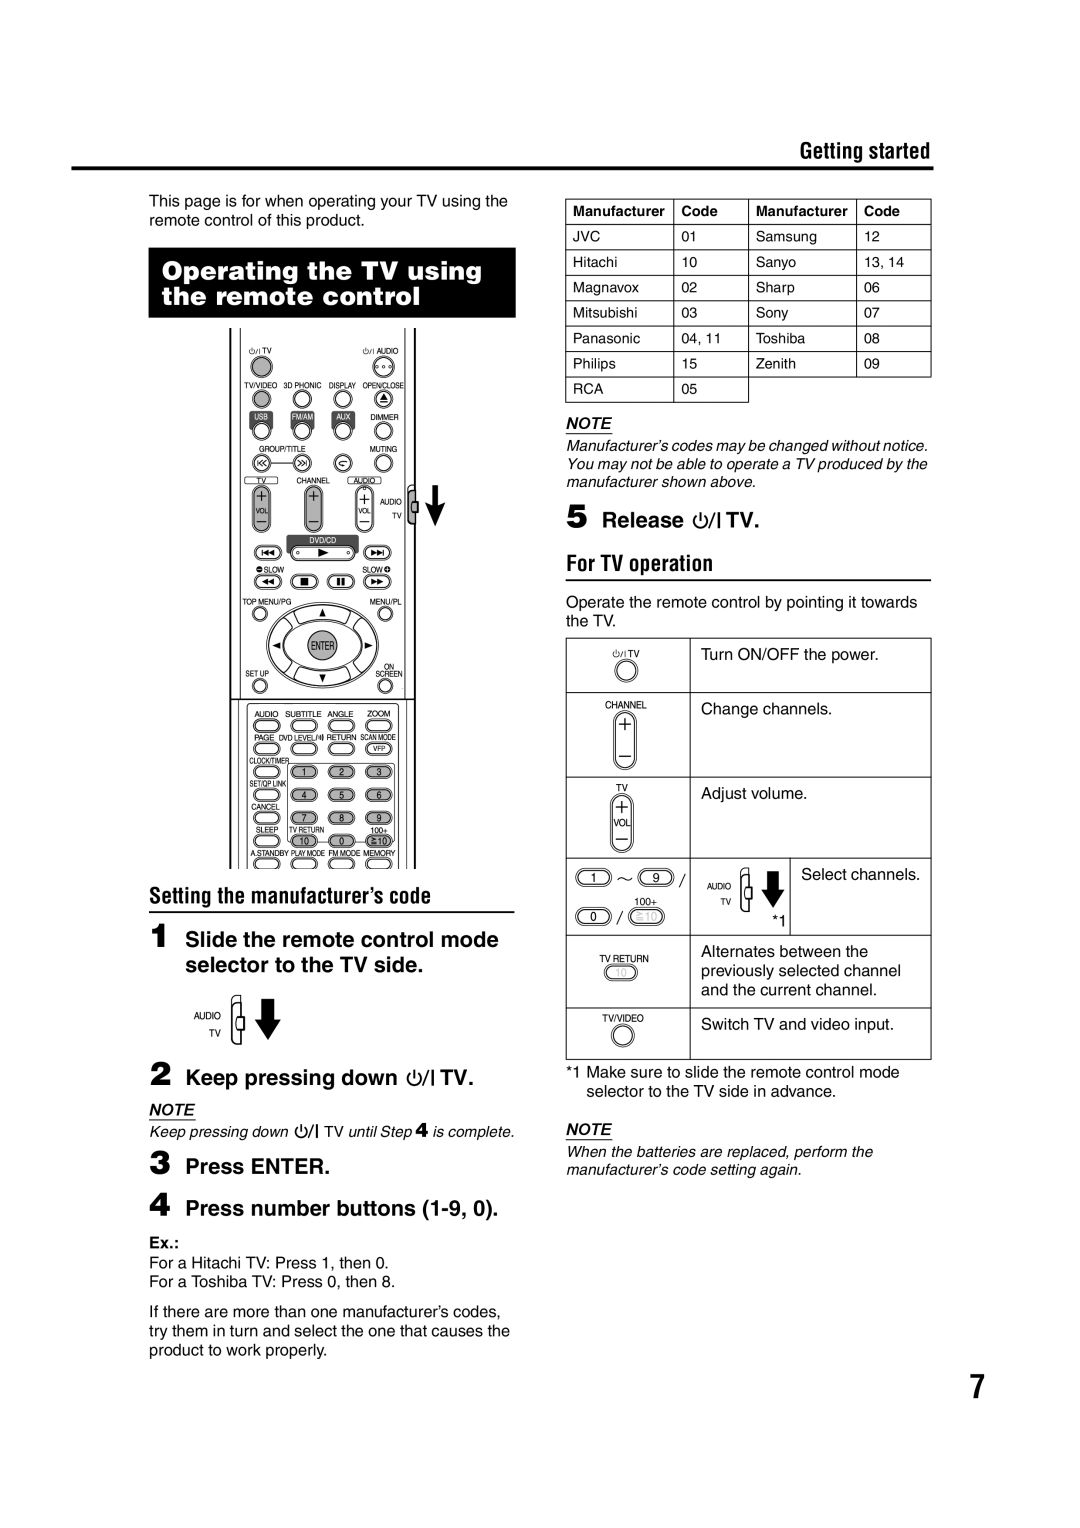 JVC GNT0066-001A manual Operating the TV using the remote control, Setting the manufacturer’s code, Keep pressing down TV 